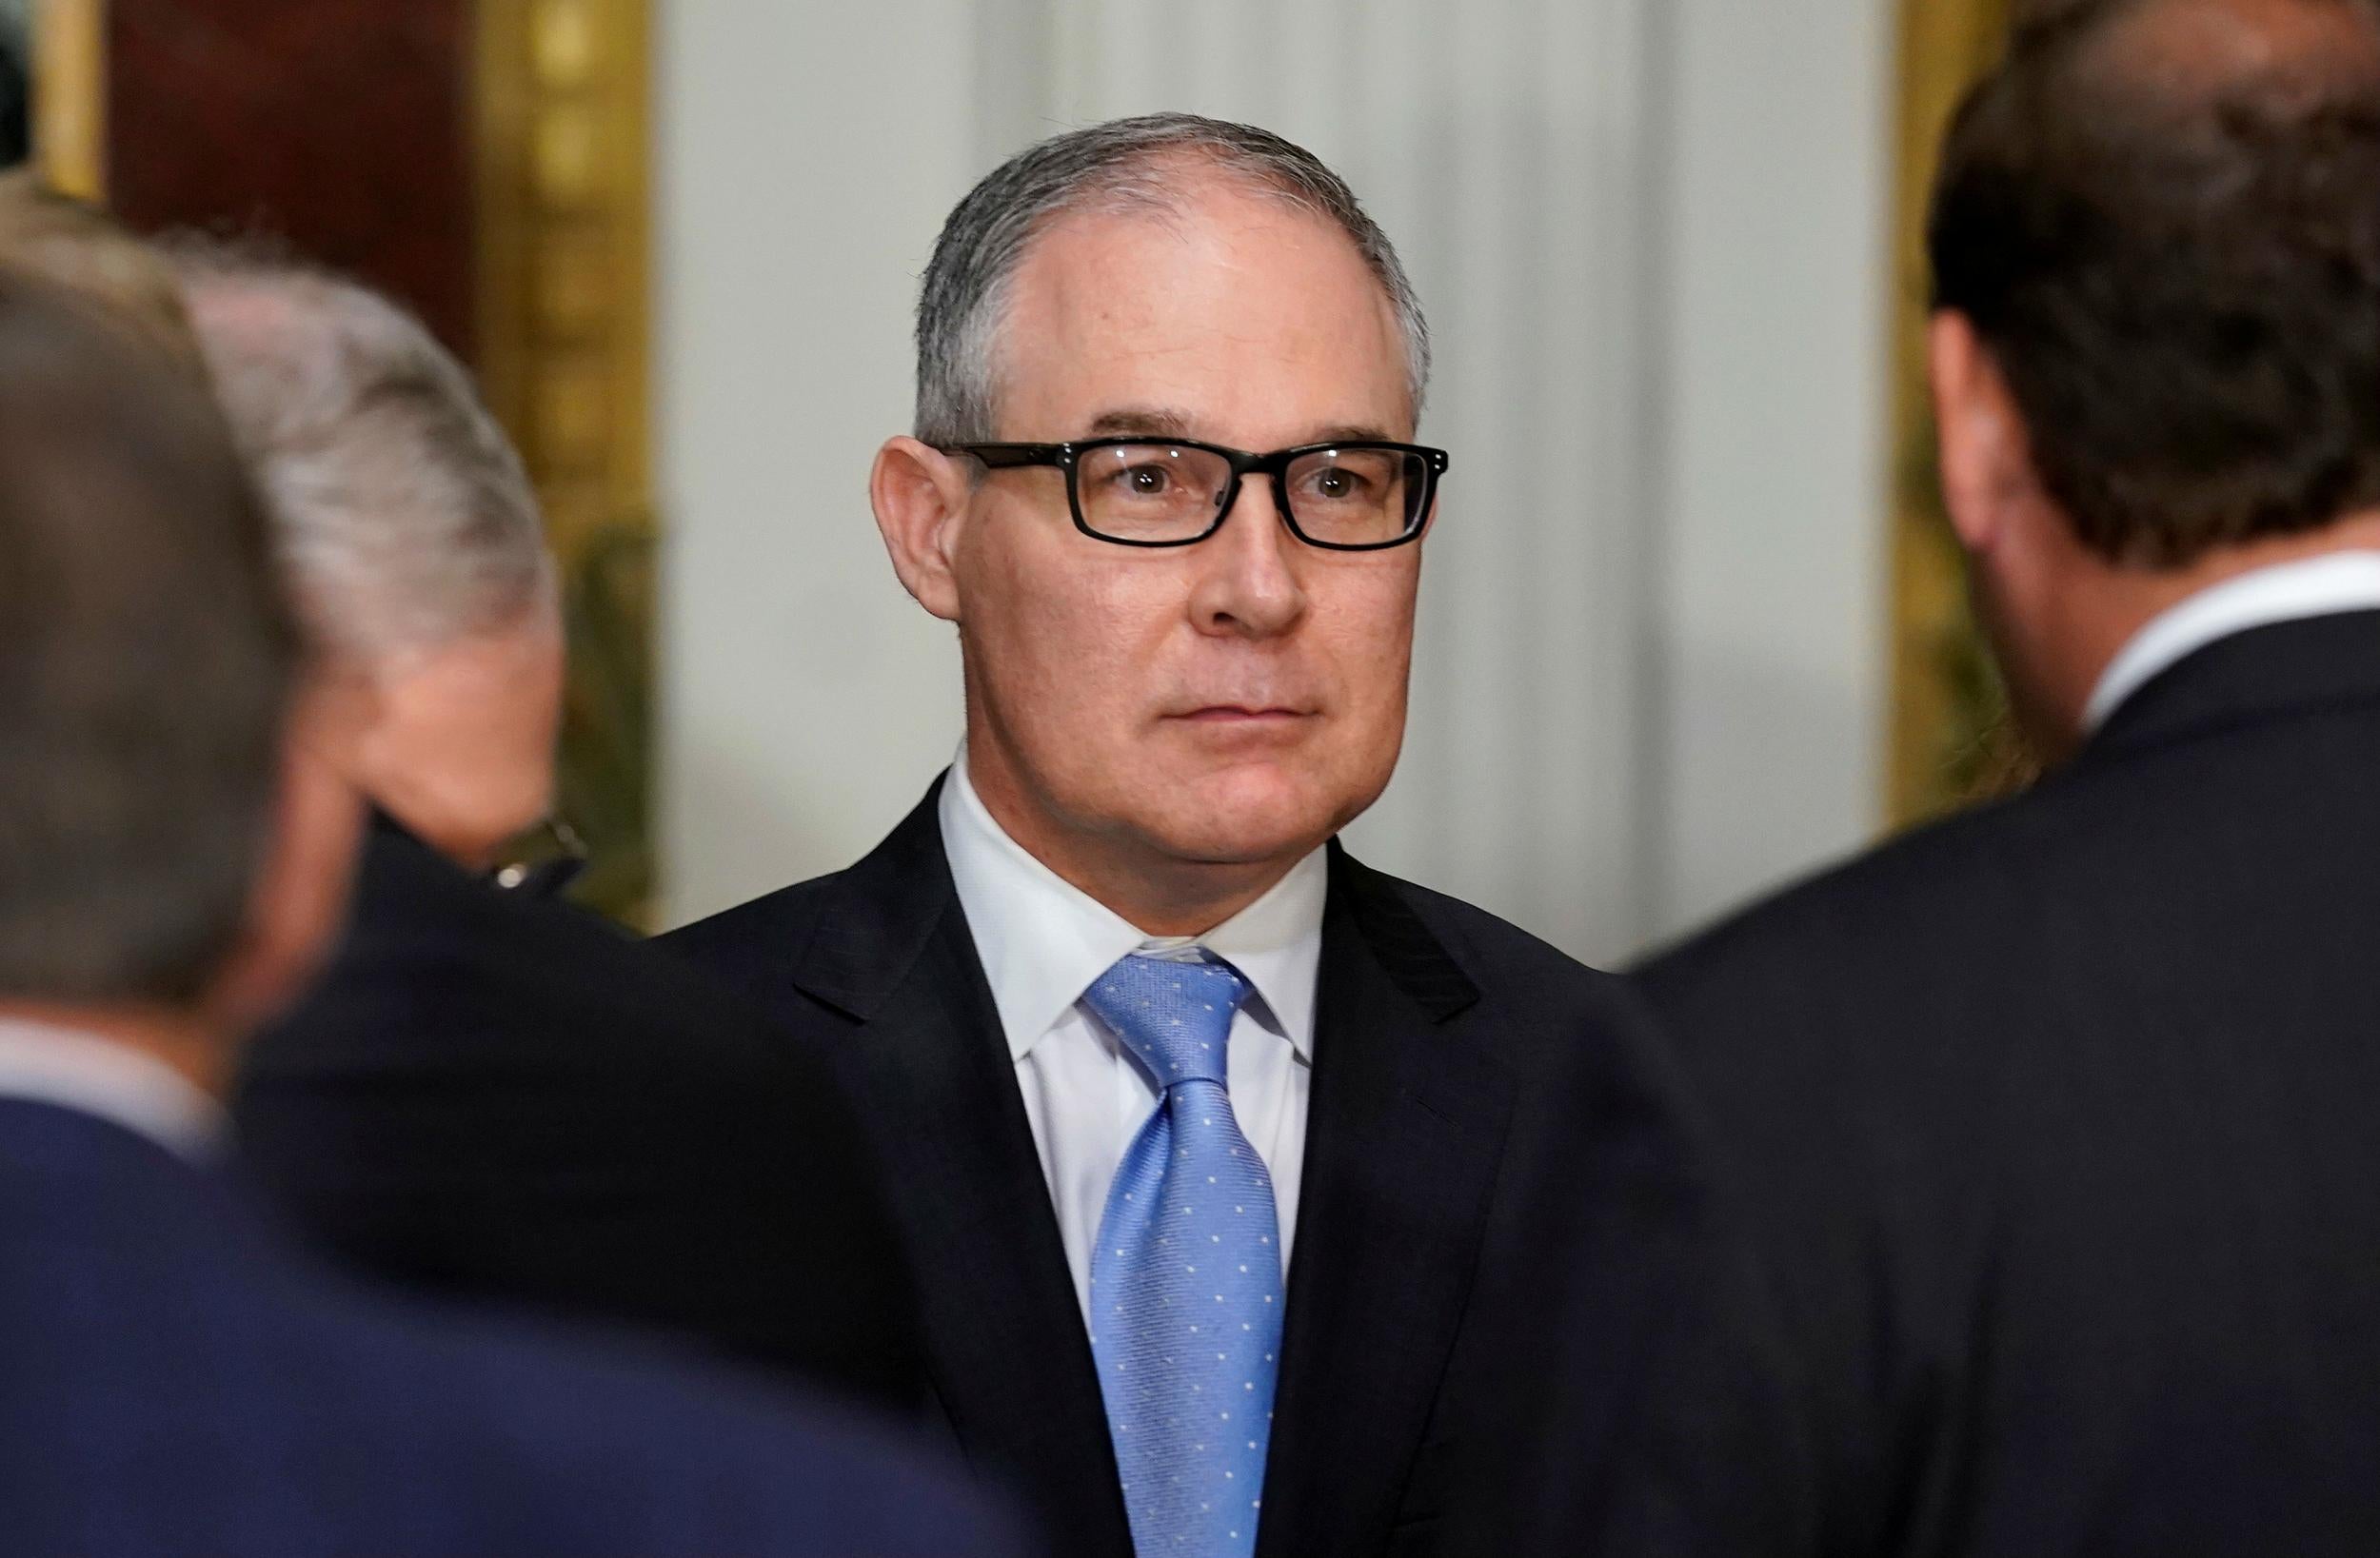 EPA administrator Scott Pruitt, in Washington, DC on September 26, 2017, is continuing a record of spending on security